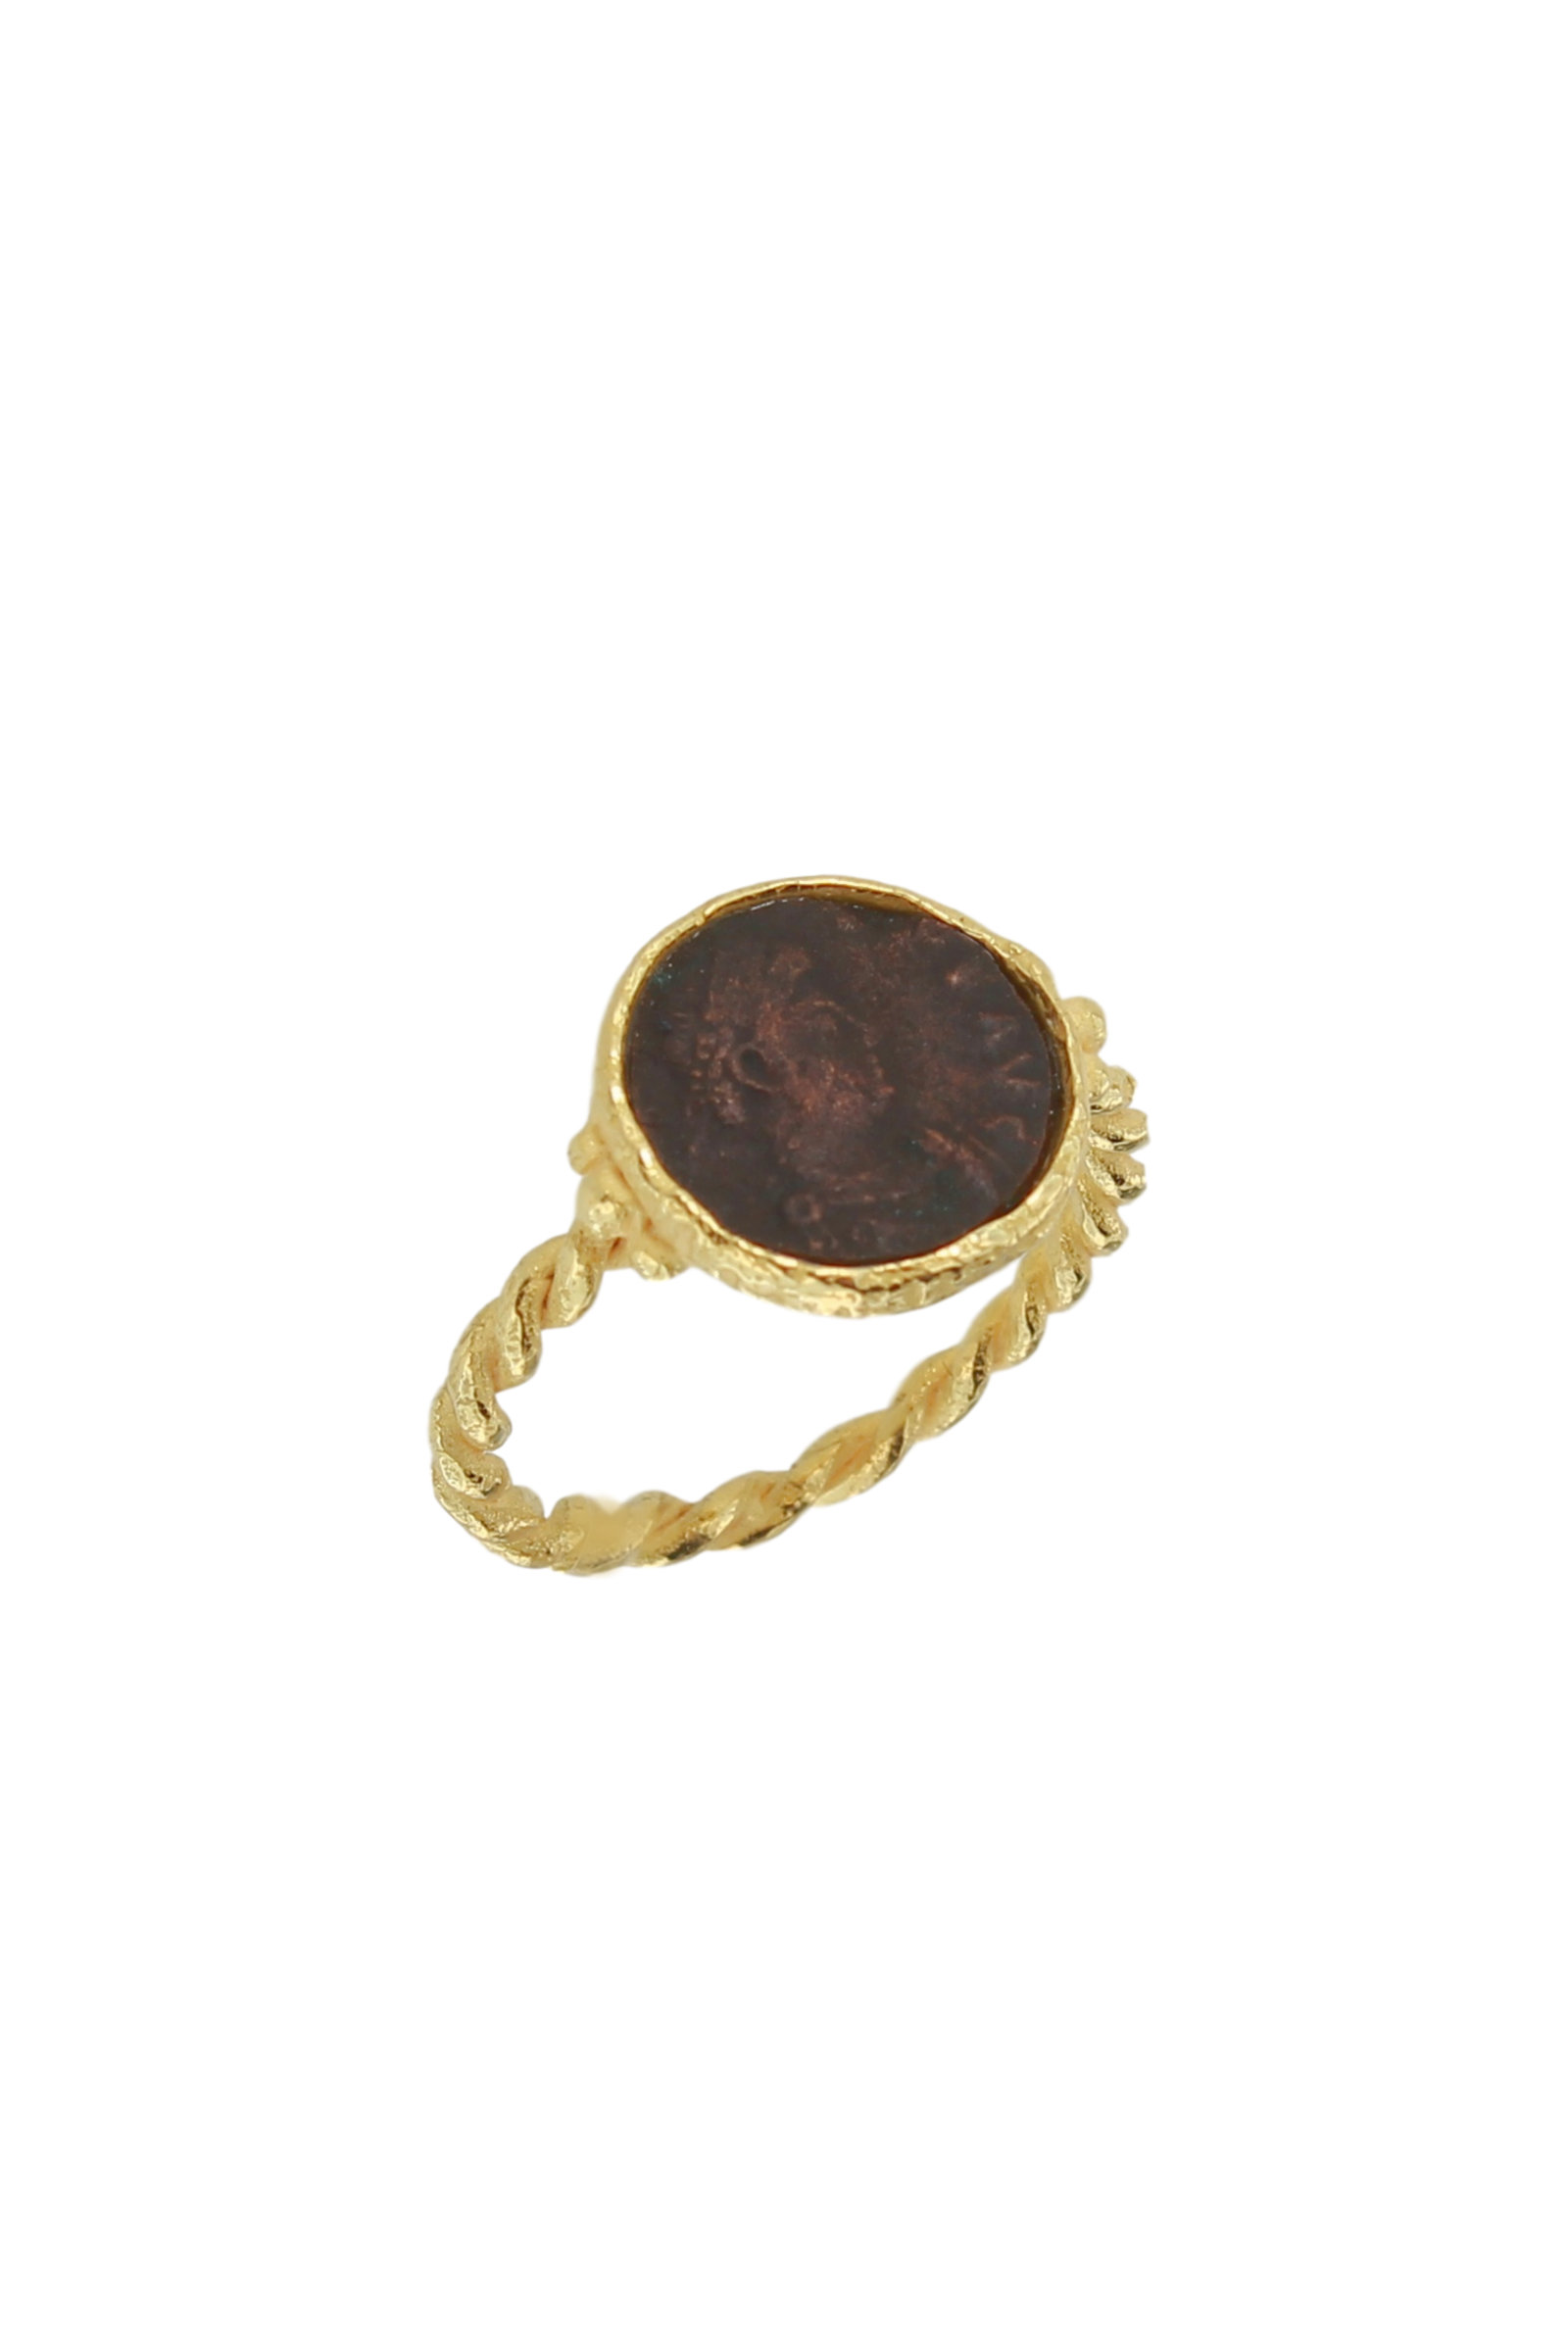 SE613A-18-Kt-Yellow-Gold-Ring-with-Roman-Coin-1